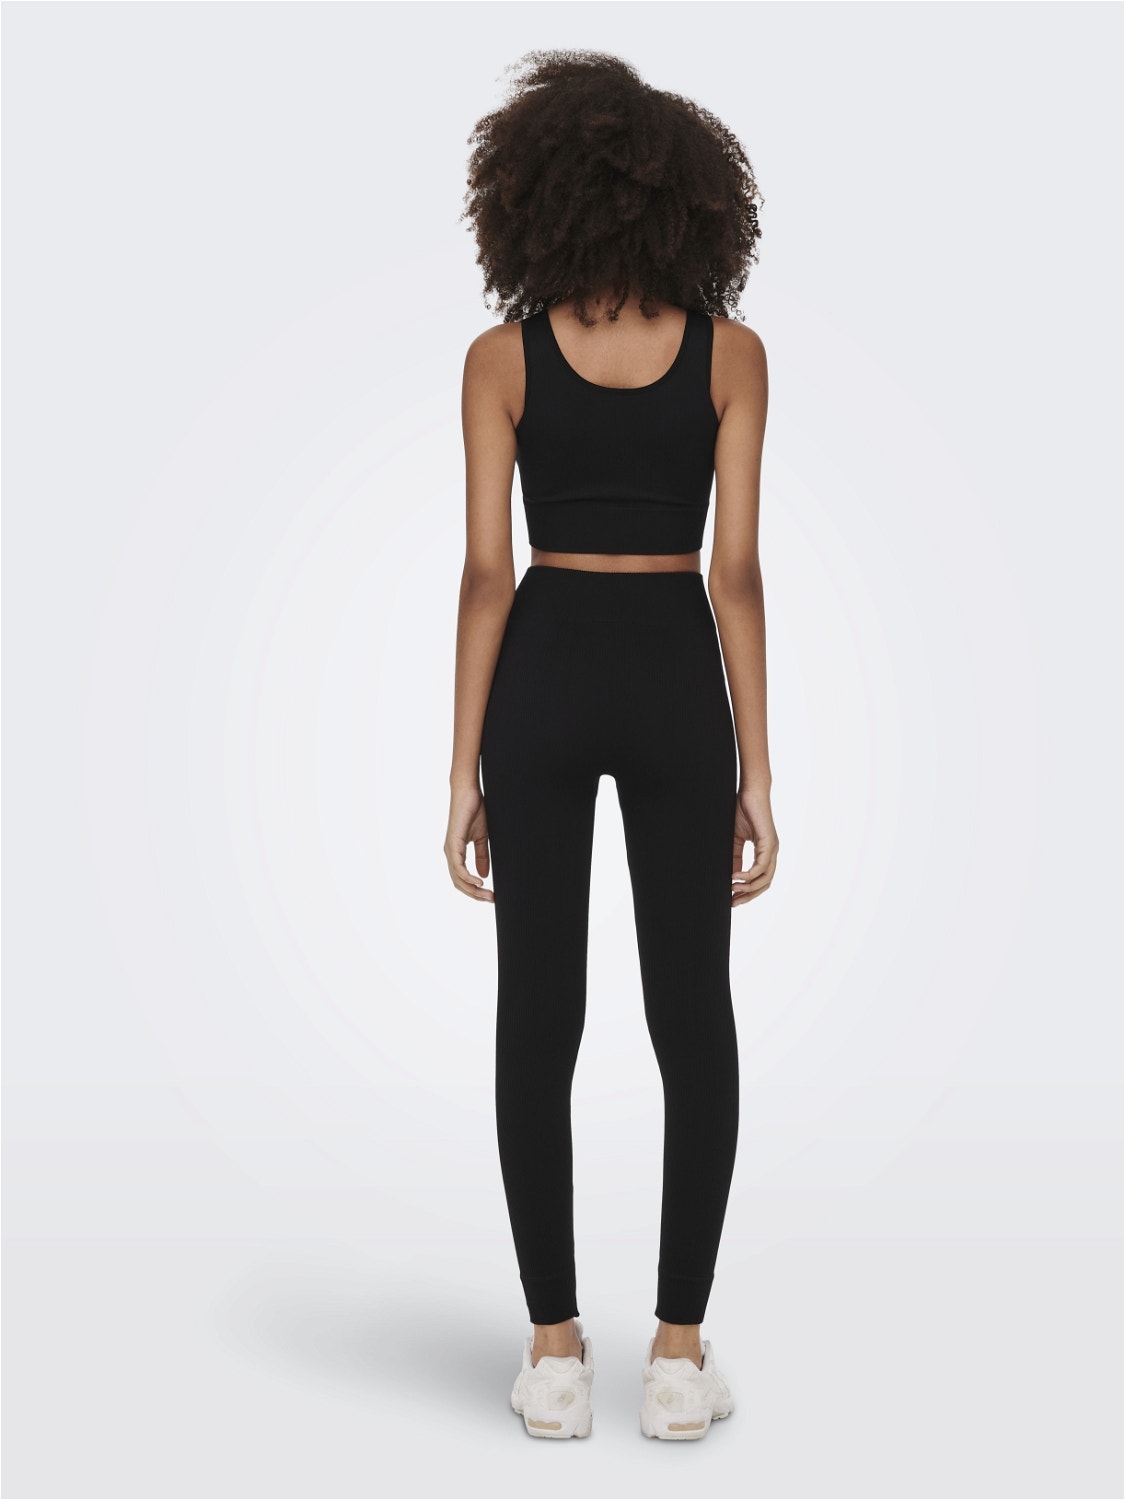 ONLY Leggings Tight Fit Taille haute -Black - 15250052